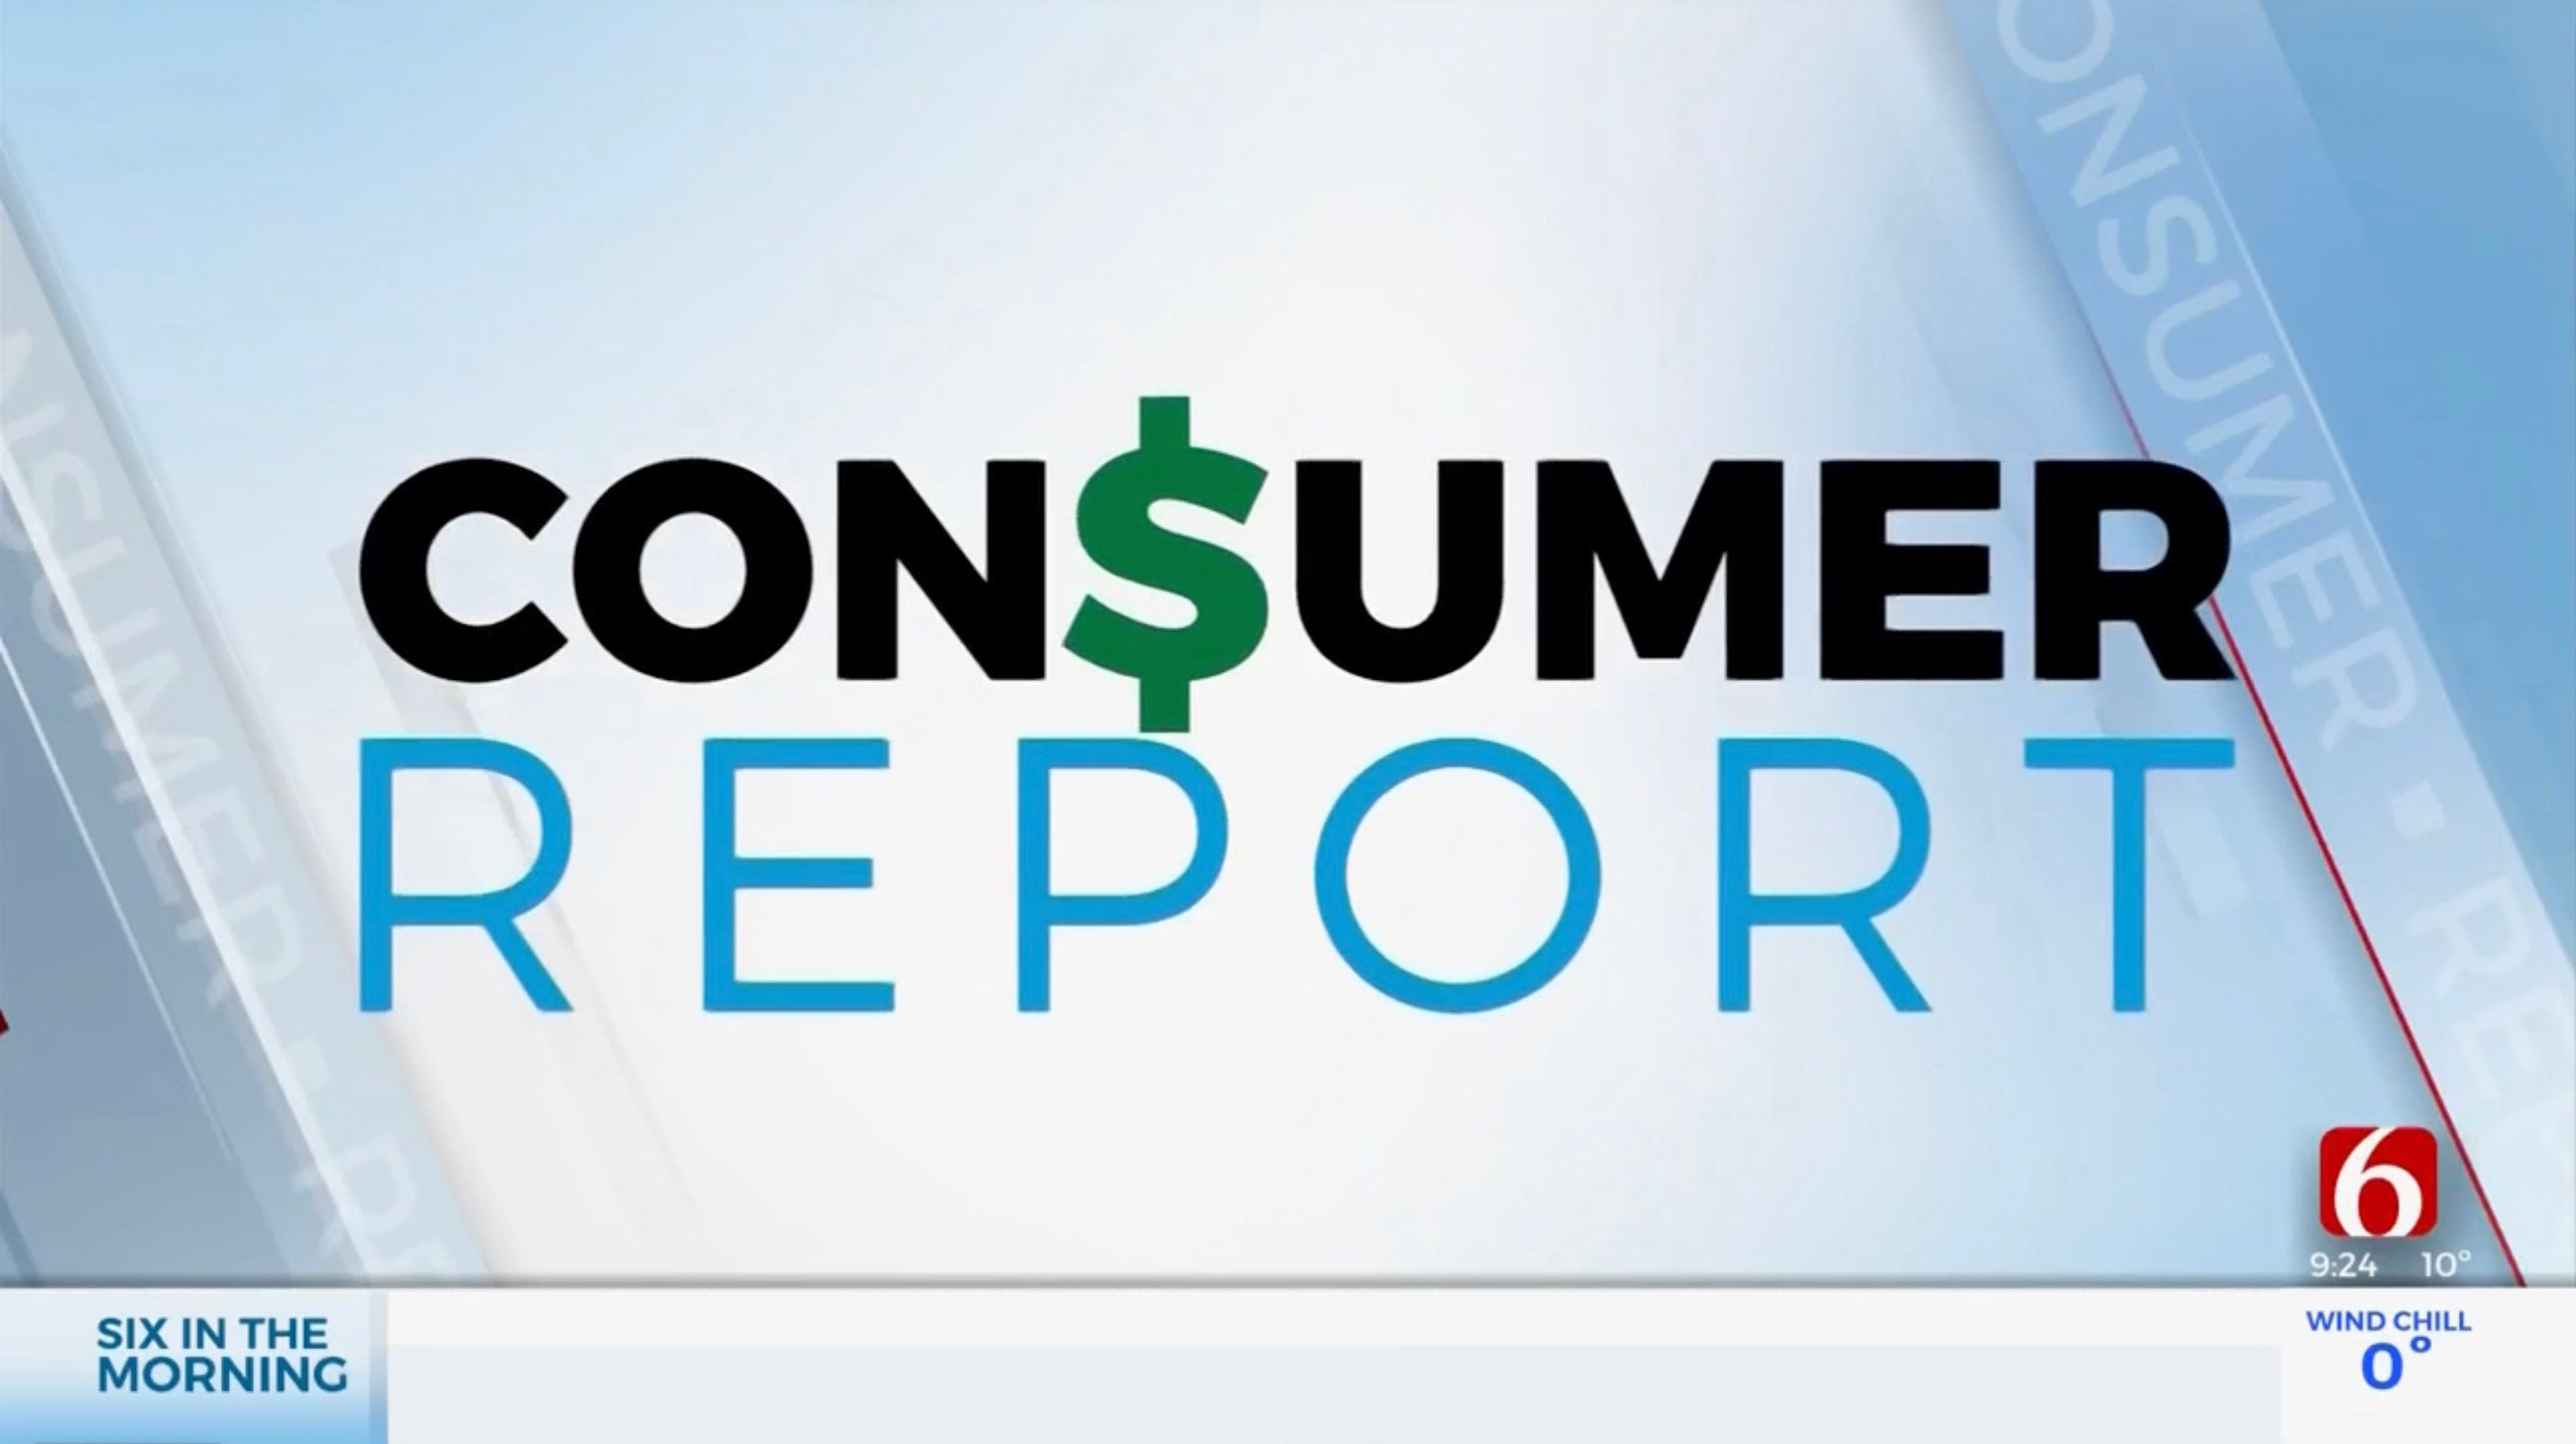 Consumer Report: The Reasons Behind Americans' Negative Views On The Economy